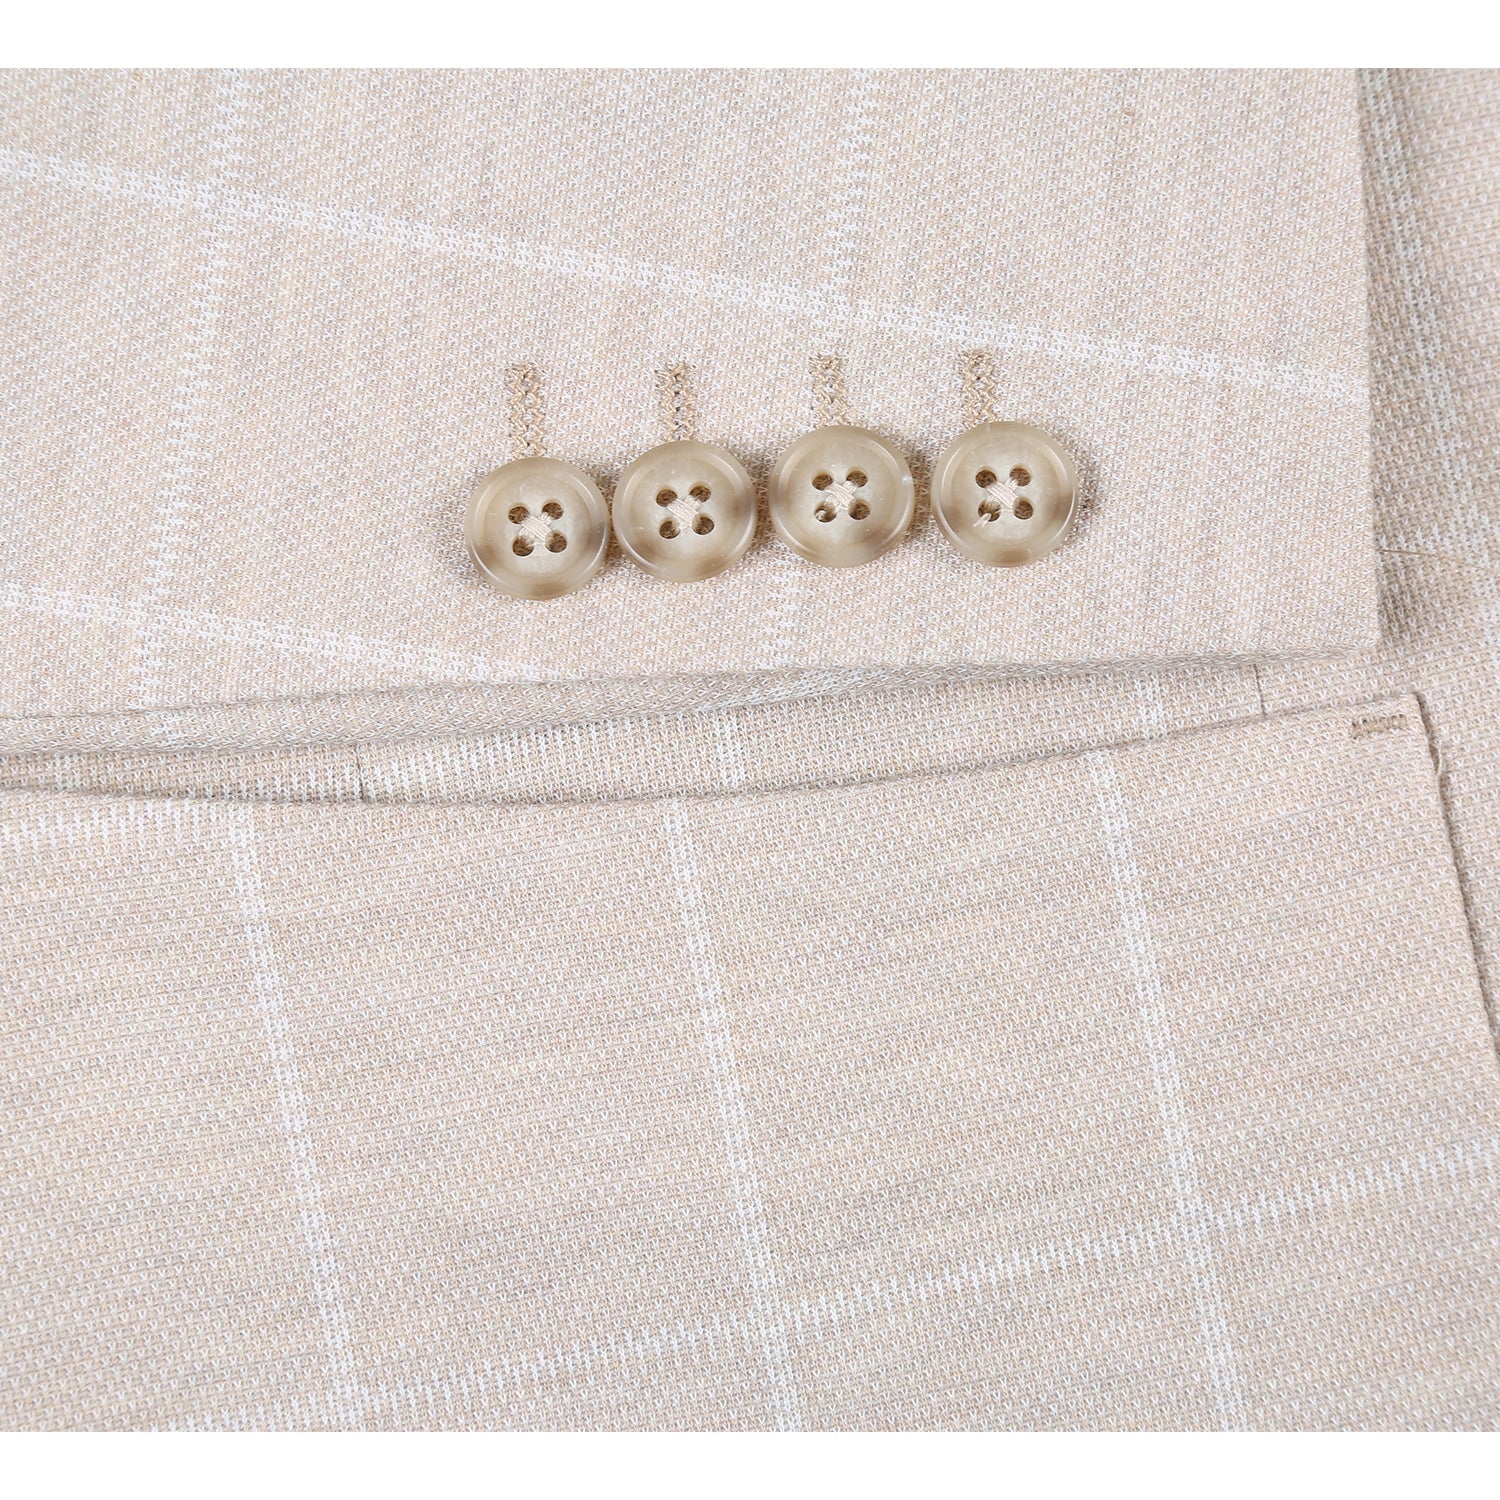 Single Breasted SLIM FIT Half Canvas Knit Soft Jacket in Beige Plaid by Pelago